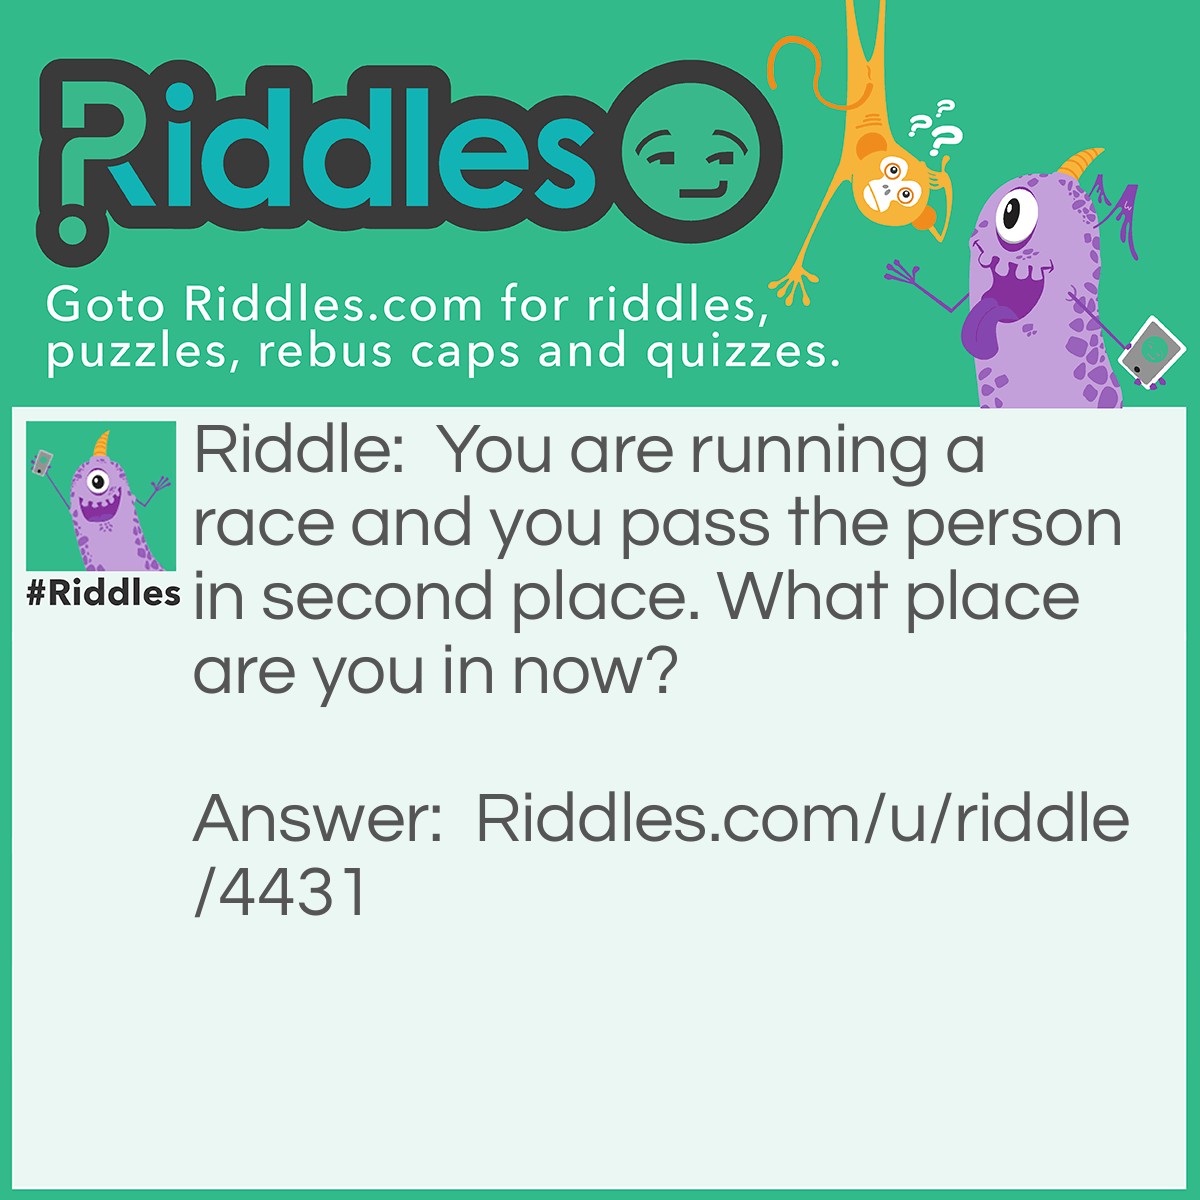 Riddle: You are running a race and you pass the person in second place. What place are you in now? Answer: Second.